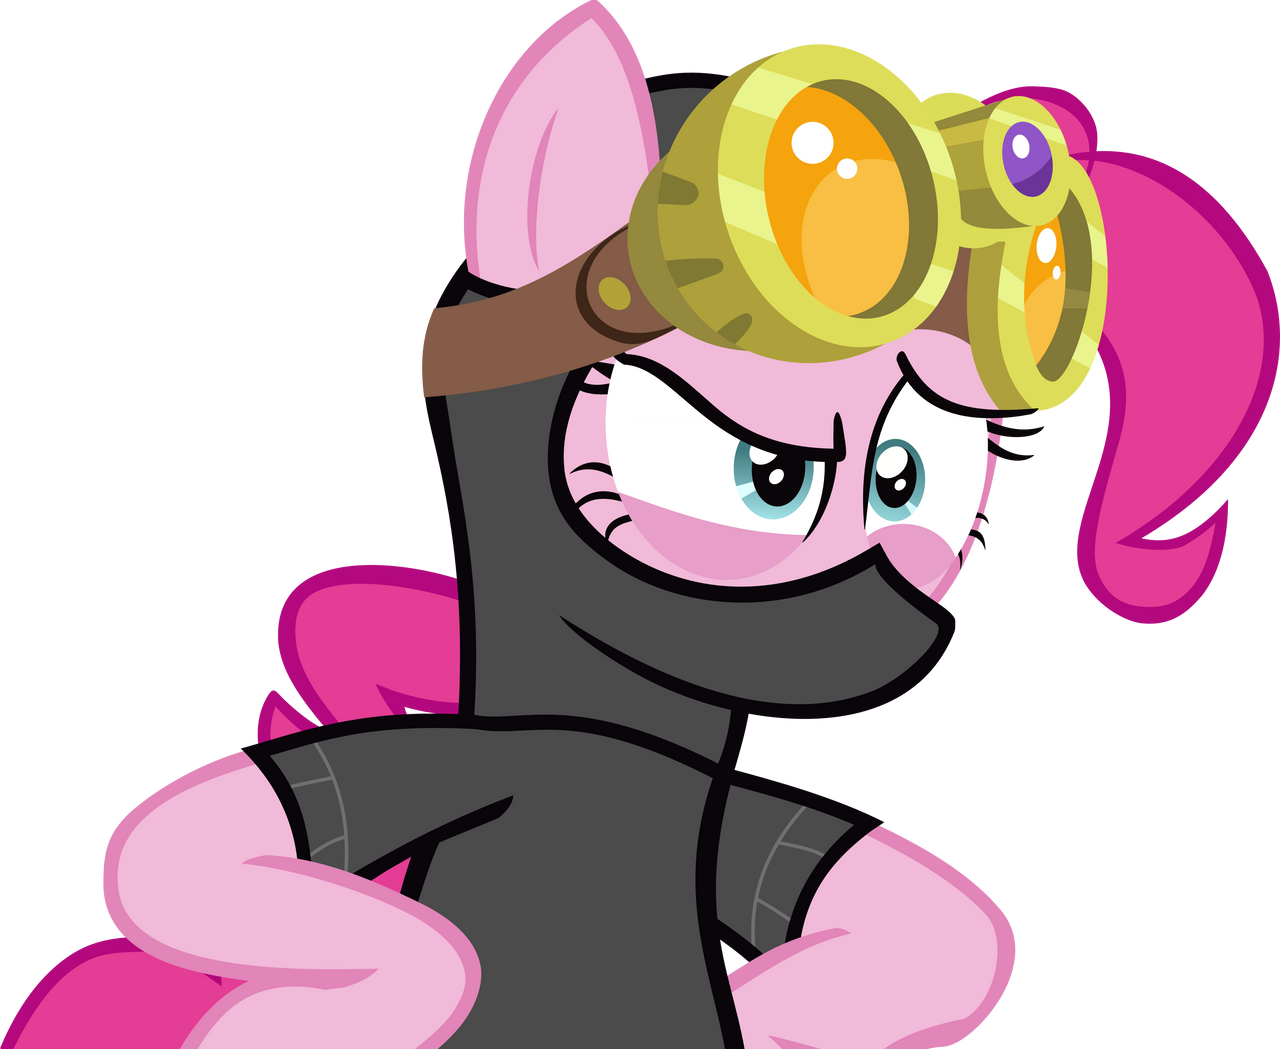 pinkie_pie_vector_s03e01_by_arroyopl-d5wxy2k.png